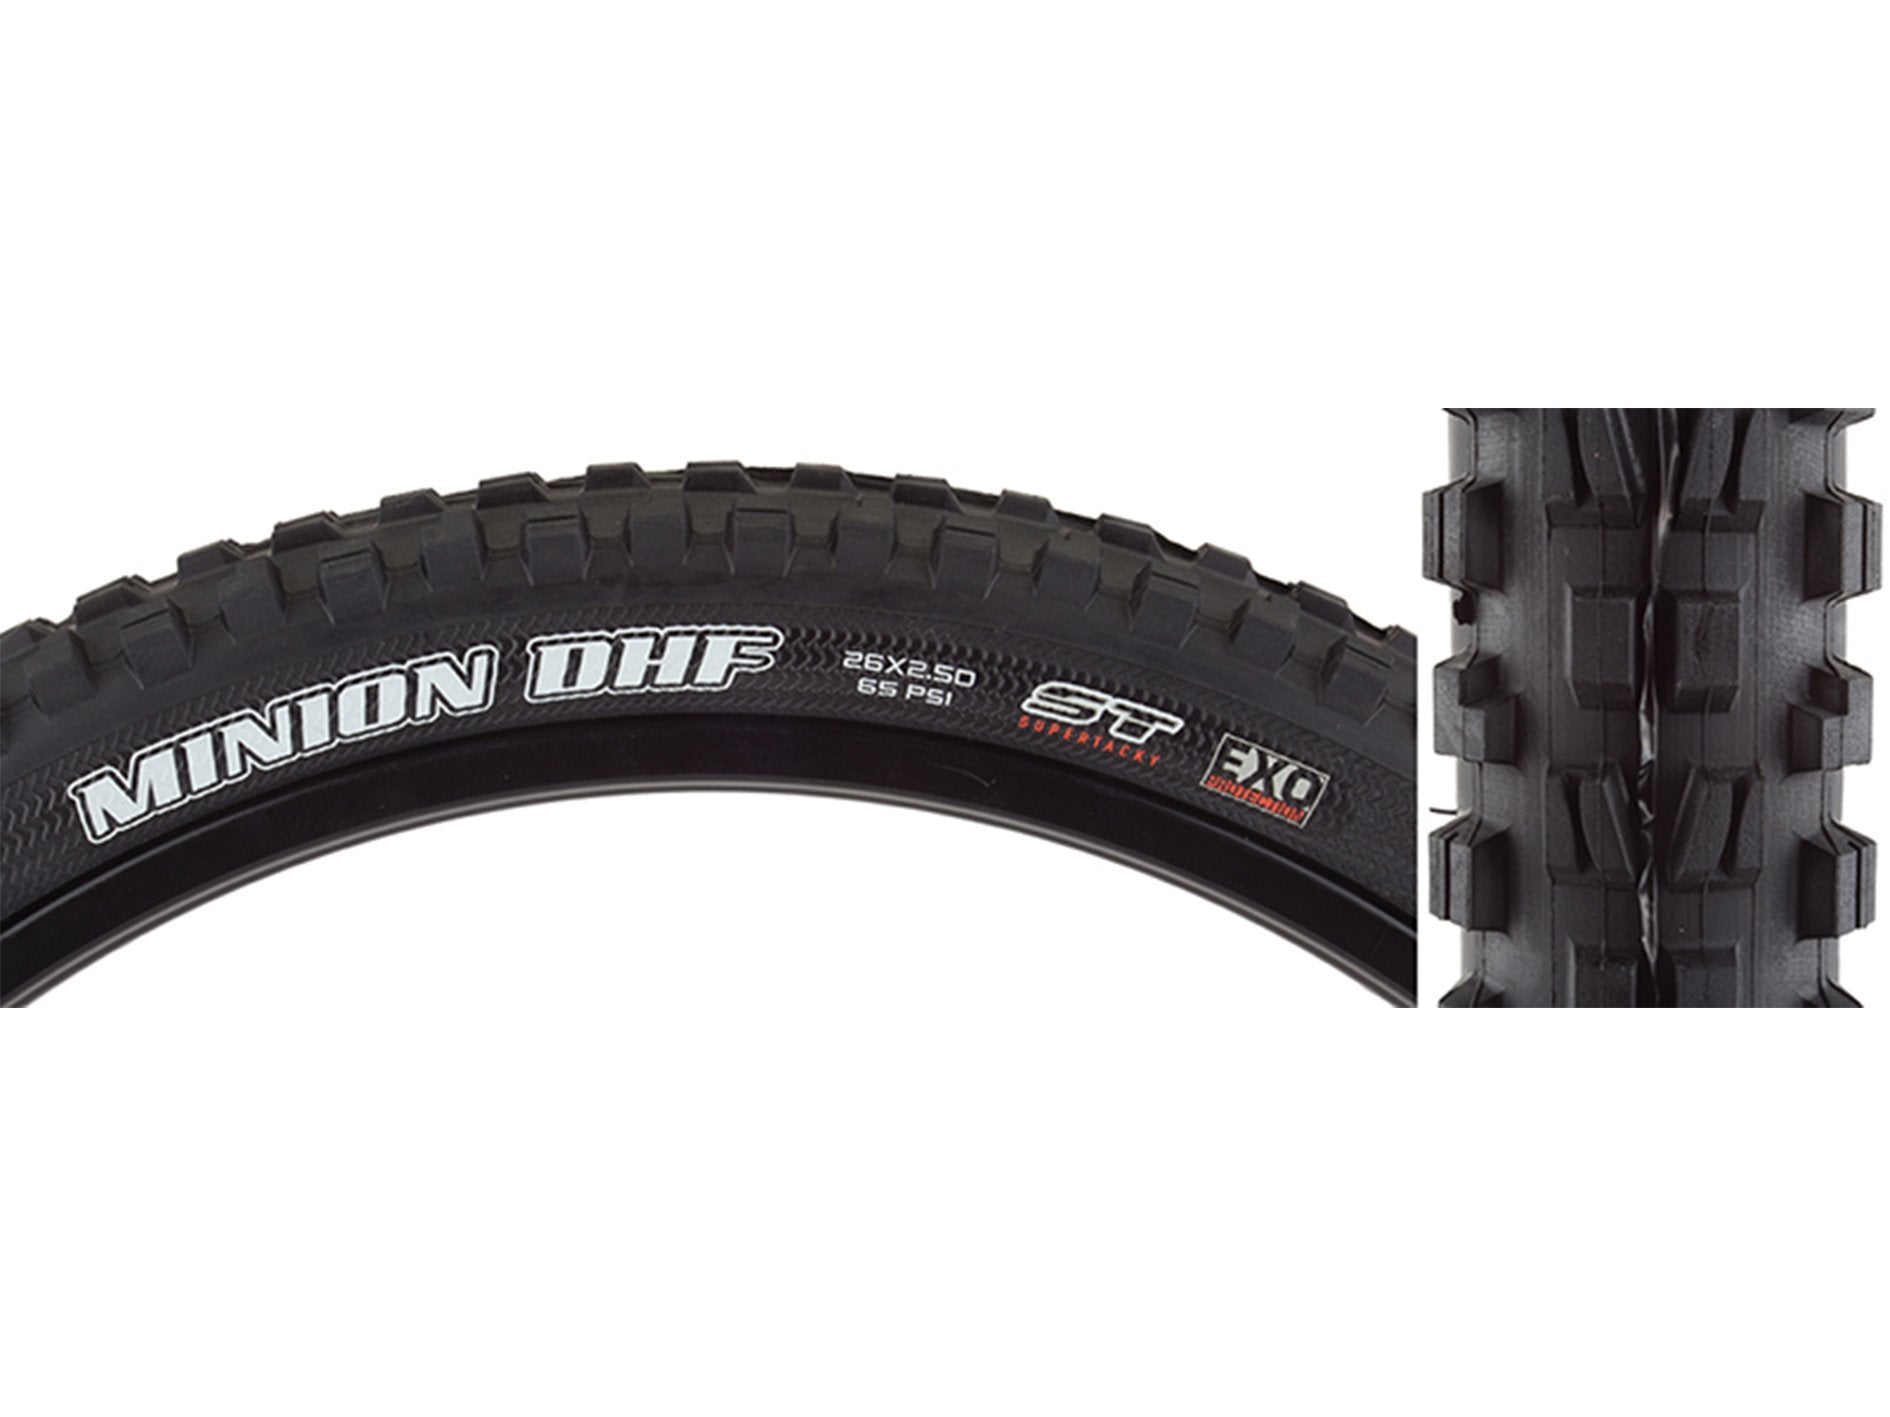 Maxxis Minion DHF 26" Folding MTB Tire - WT Wide Trail - EXO Black 2.5" (DC)Dual Compound - (ST)Super Tacky - (EXO)EXO Sidewall - 60TPI